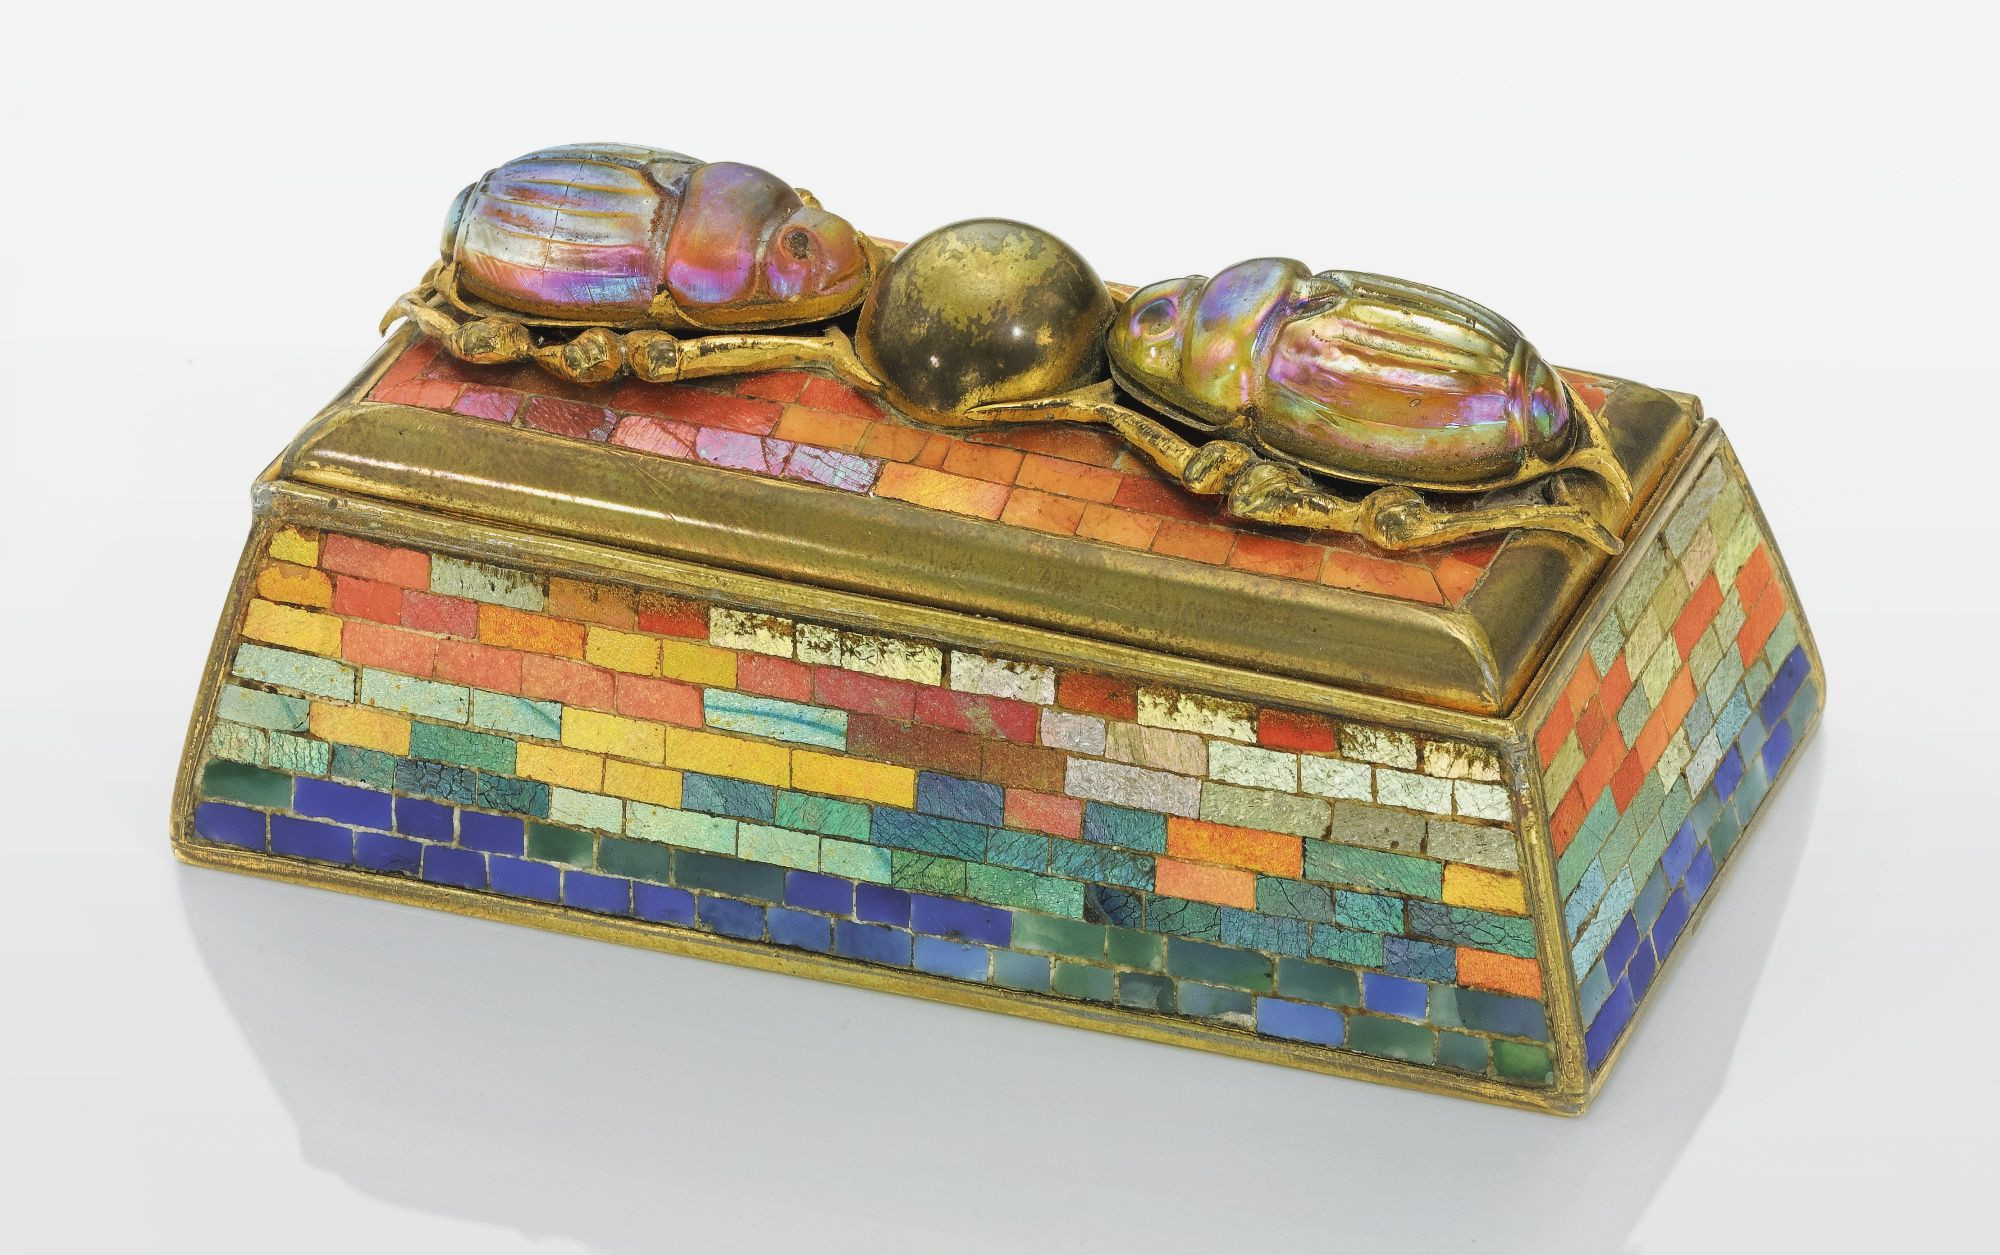 14 Ideal Lc Tiffany Favrile Vase 2024 free download lc tiffany favrile vase of tiffany studios a rare scarab stamp box impressed tiffany studios for tiffany studios a rare scarab stamp box impressed tiffany studios new york favrile